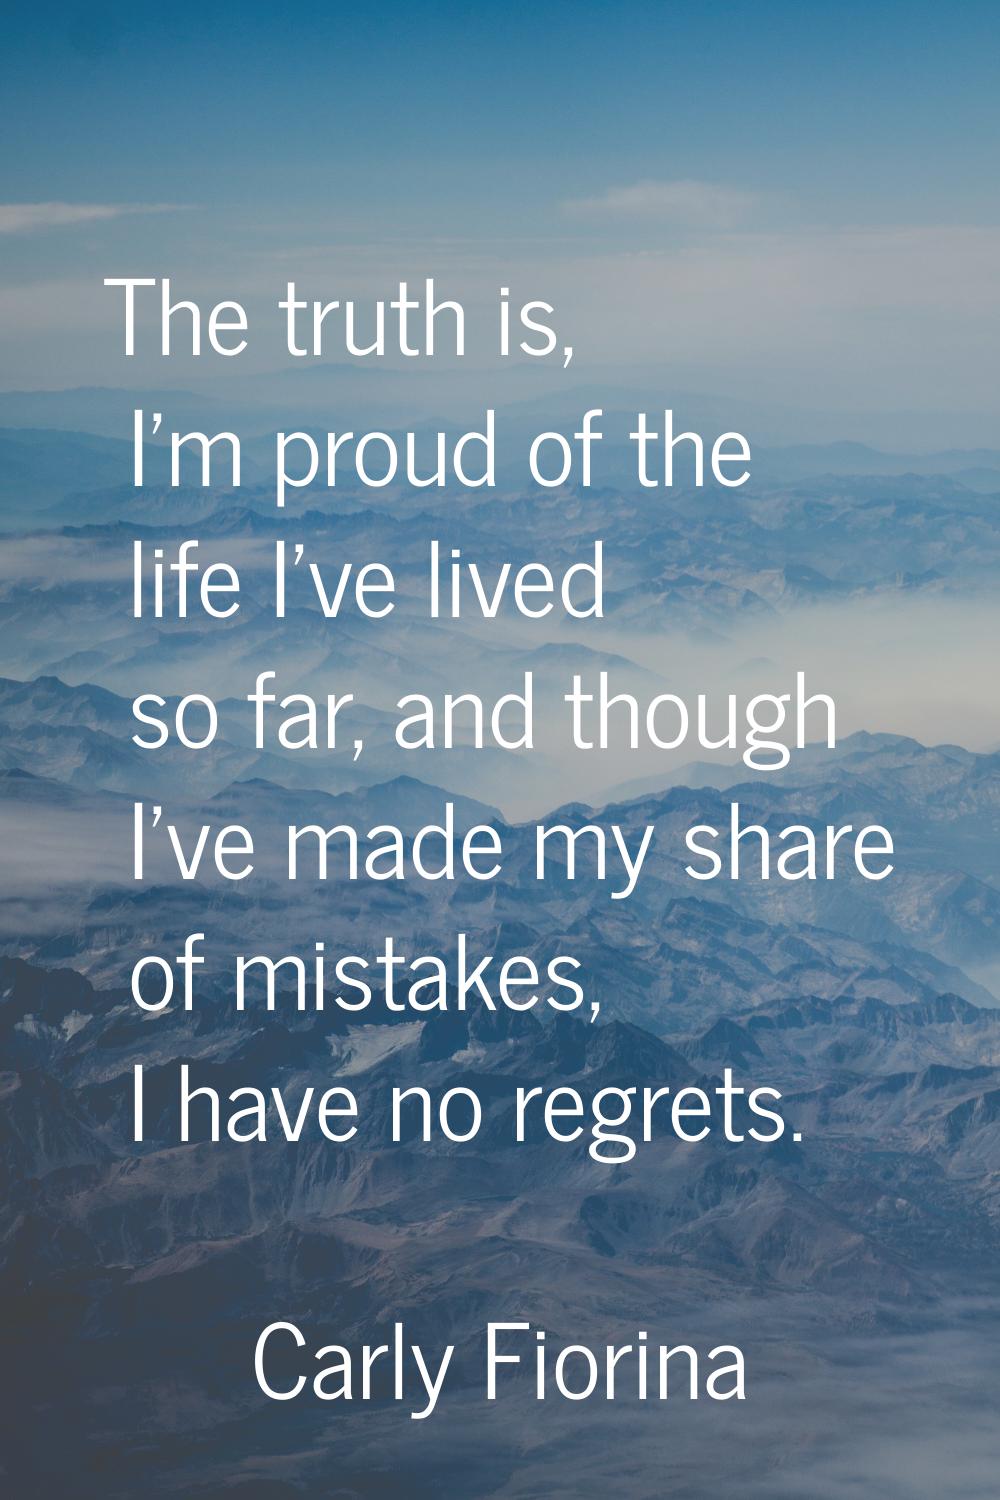 The truth is, I'm proud of the life I've lived so far, and though I've made my share of mistakes, I